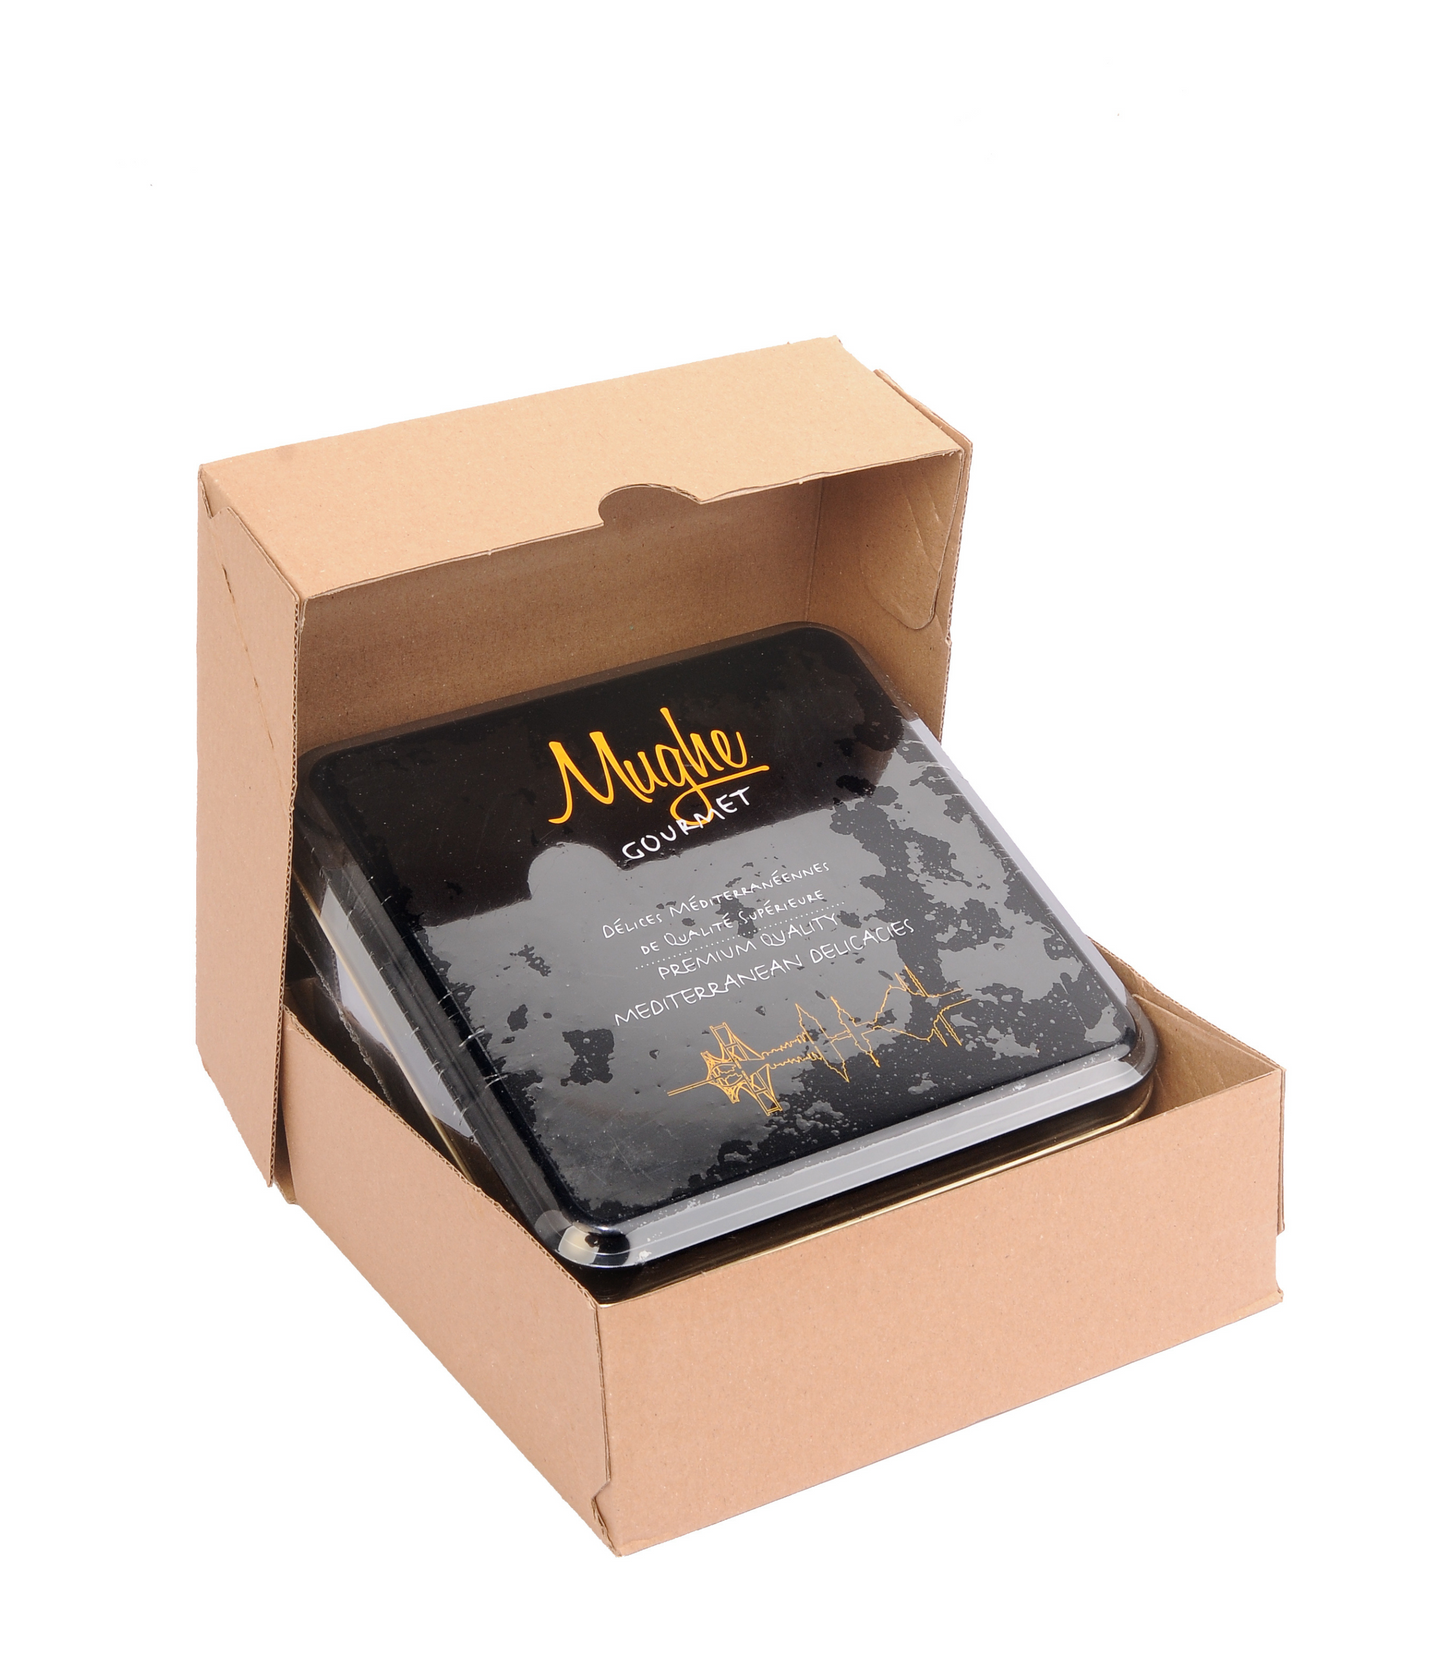 
                  
                    Mughe Sultan Pistachio Turkish Delight - Elegant Lokum Gift Box with Delights 2.2lb/1000g/54pc - Perfect Gifts for Valentine's Day and Mother's Day
                  
                